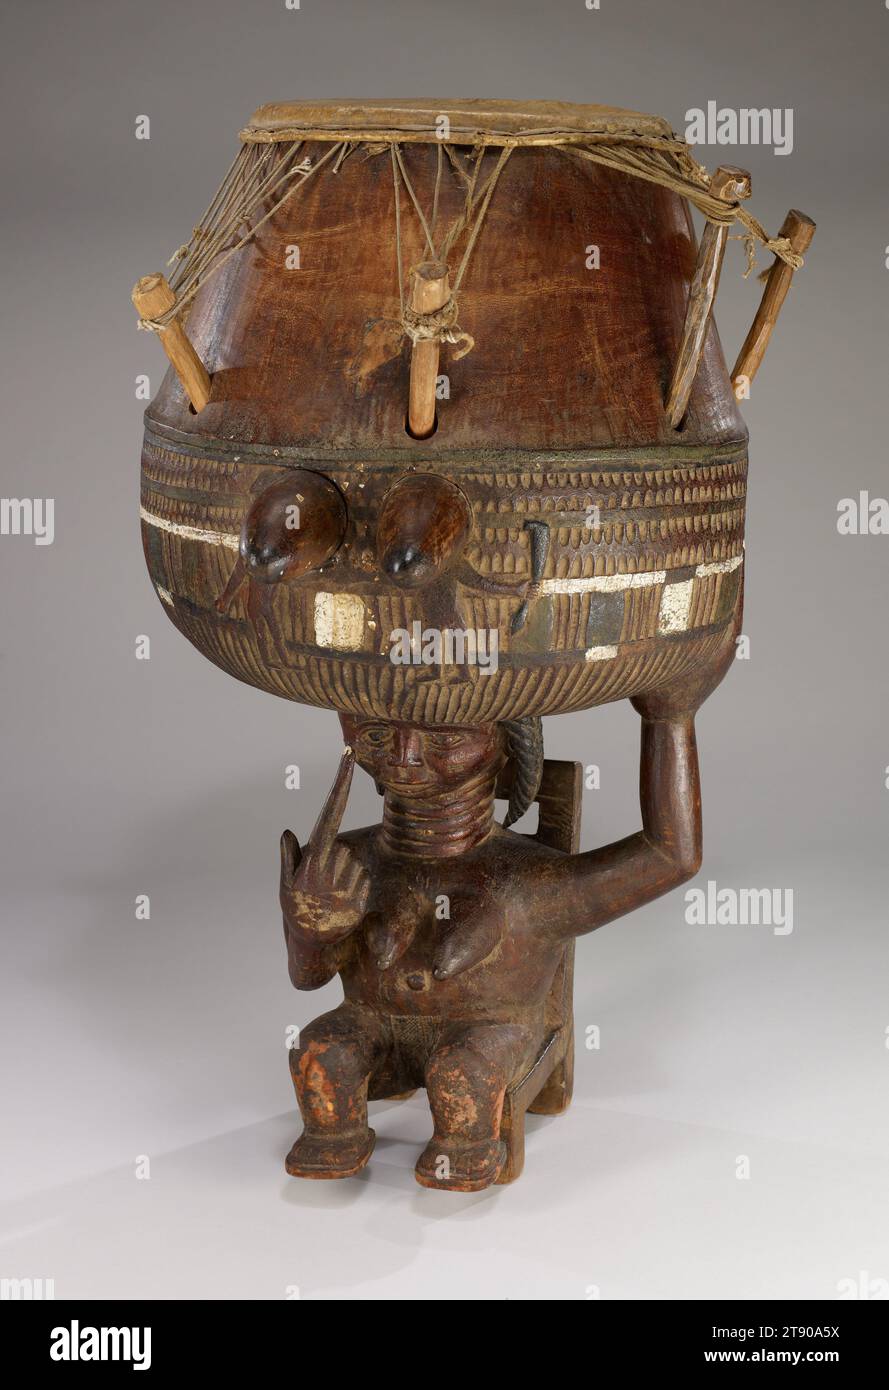 Drum, about 1950, 26 3/16 x 19 1/8 x 16 in. (66.52 x 48.58 x 40.64 cm), Wood, animal skin, string, pigments, Ghana, 20th century, Akan communities in southern Ghana have a tradition in which popular bands compete in instrumental, choral, and dance performances. The master drum, sometimes identified as the 'mother of the group,' is the musical and visual focal point of each band. The gesture of the woman, her finger pointing to her eye, may refer to the proverb, 'If you can hear, can you not also see''—emphasizing the importance of using all the senses. Or it may be a warning to the other bands Stock Photo